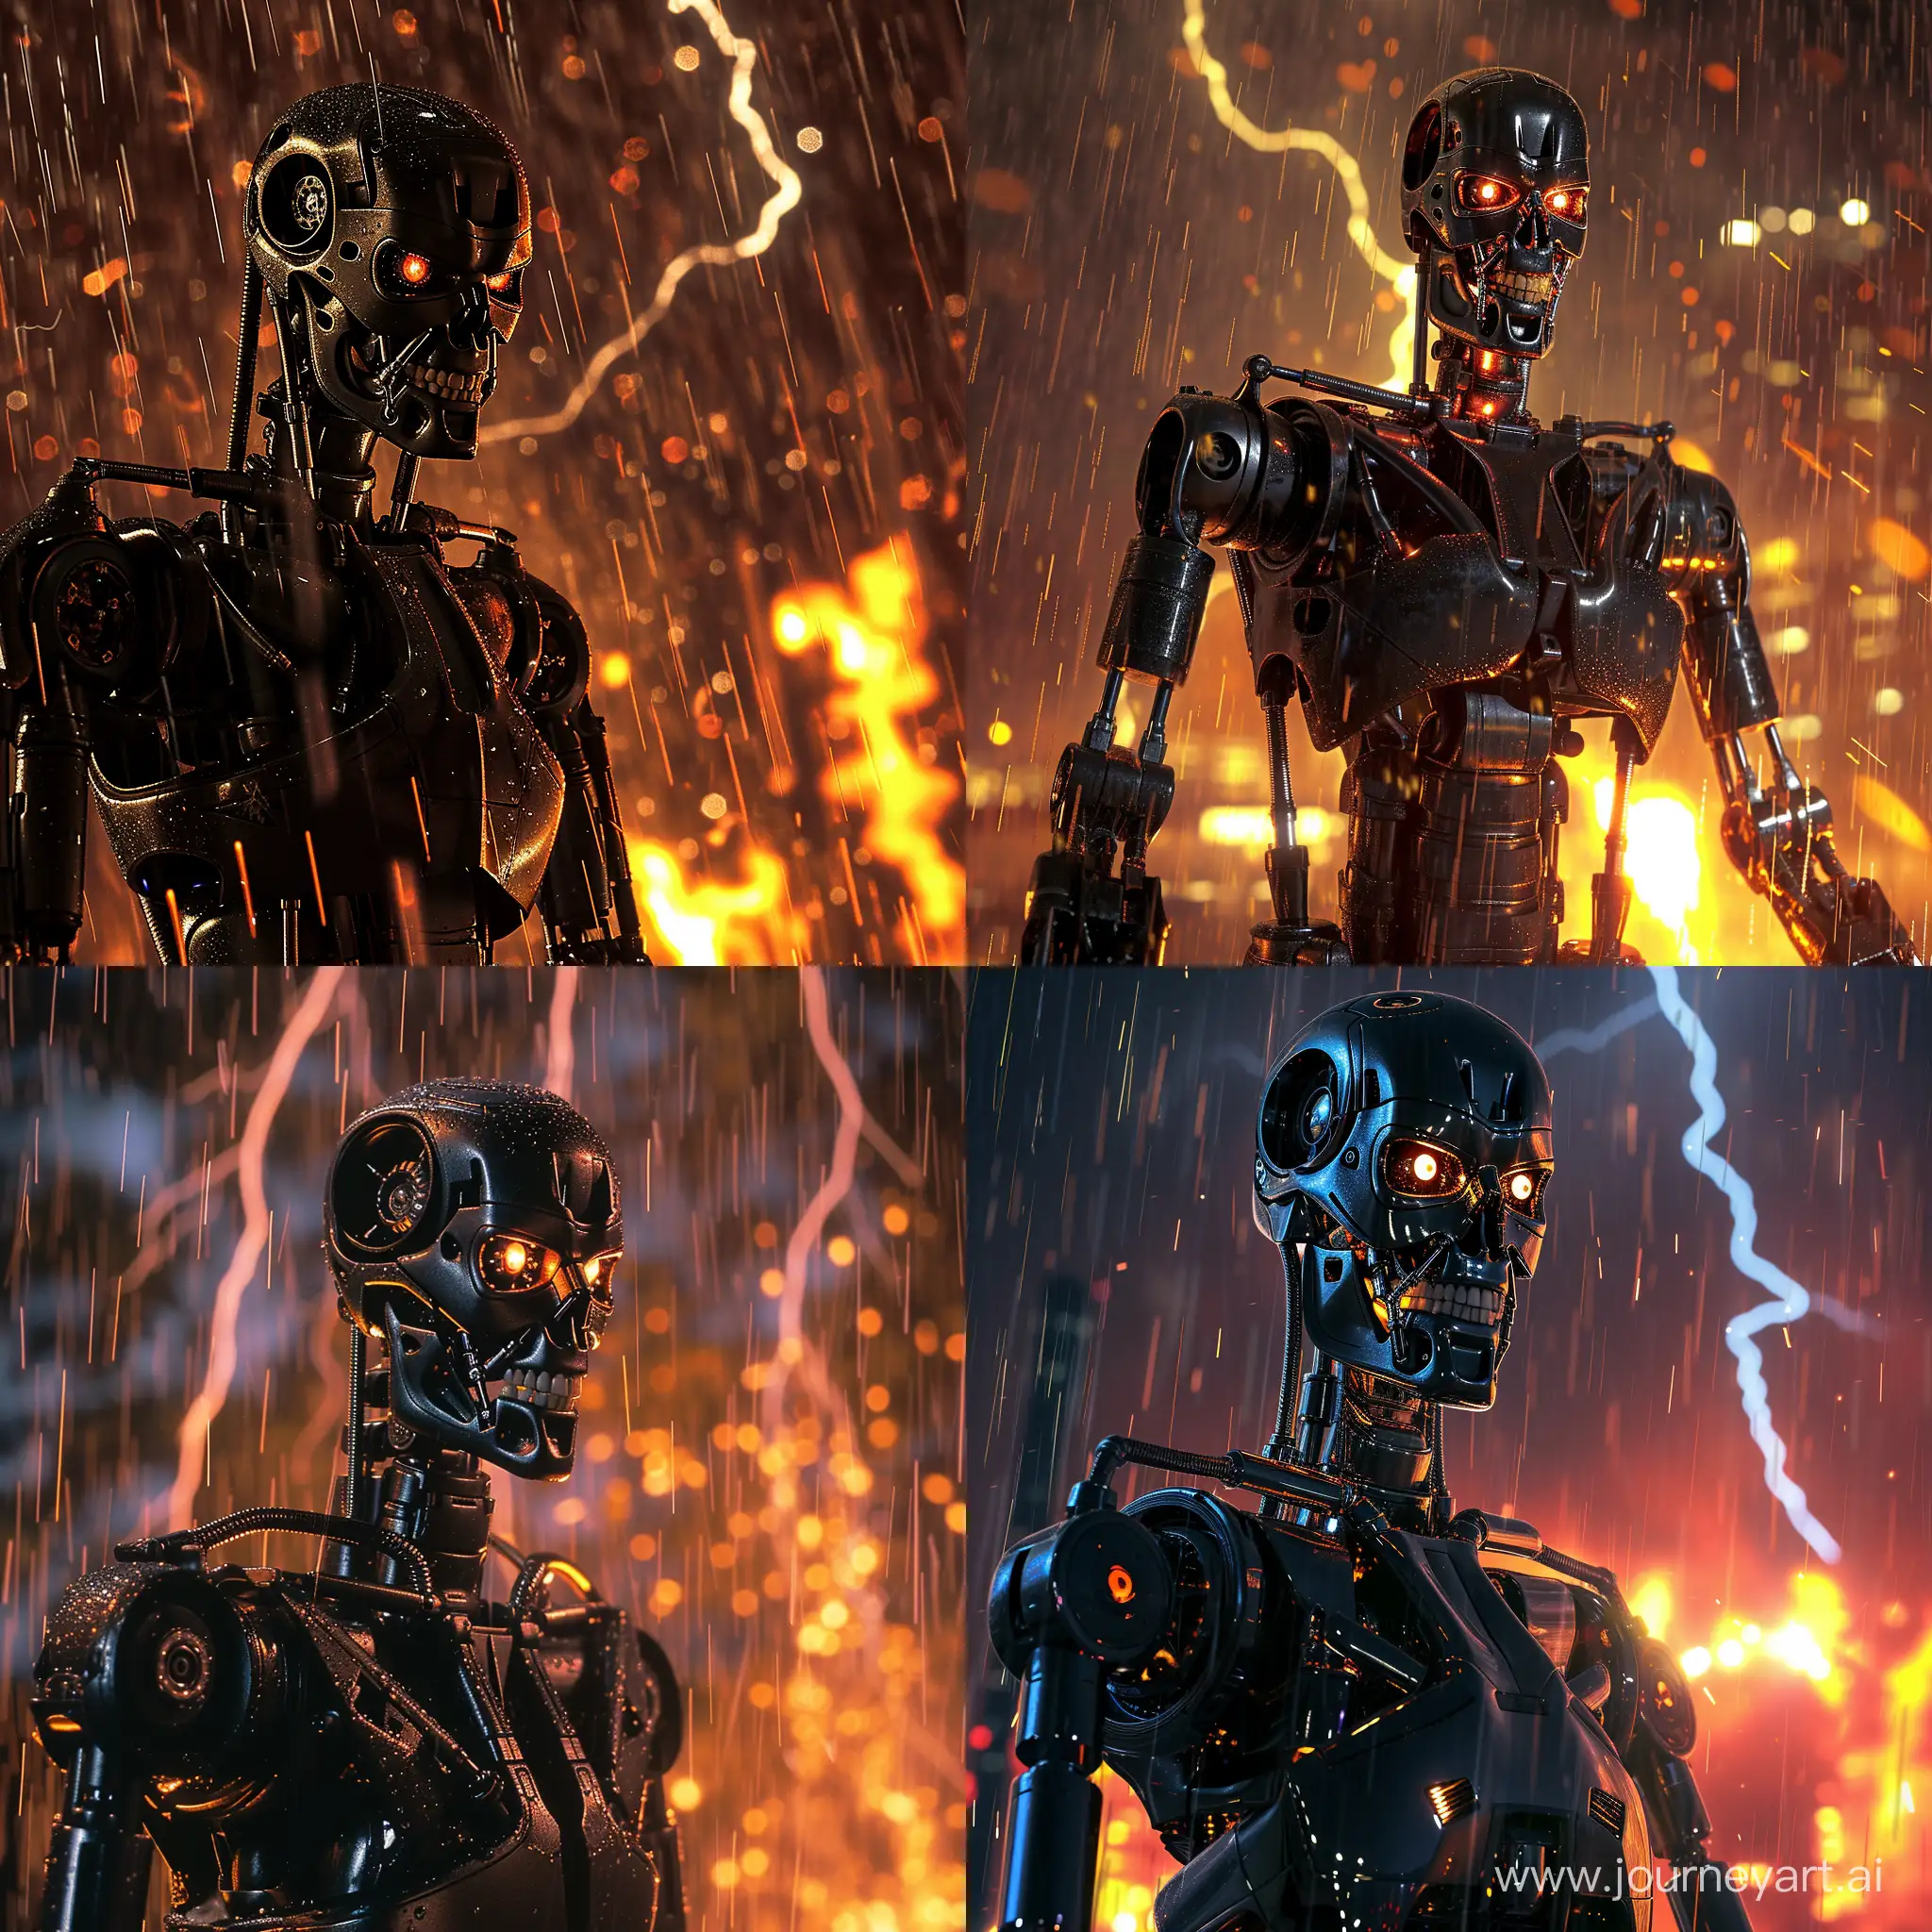 Terminator-T600-in-Night-Rainstorm-with-Lightning-and-Fire